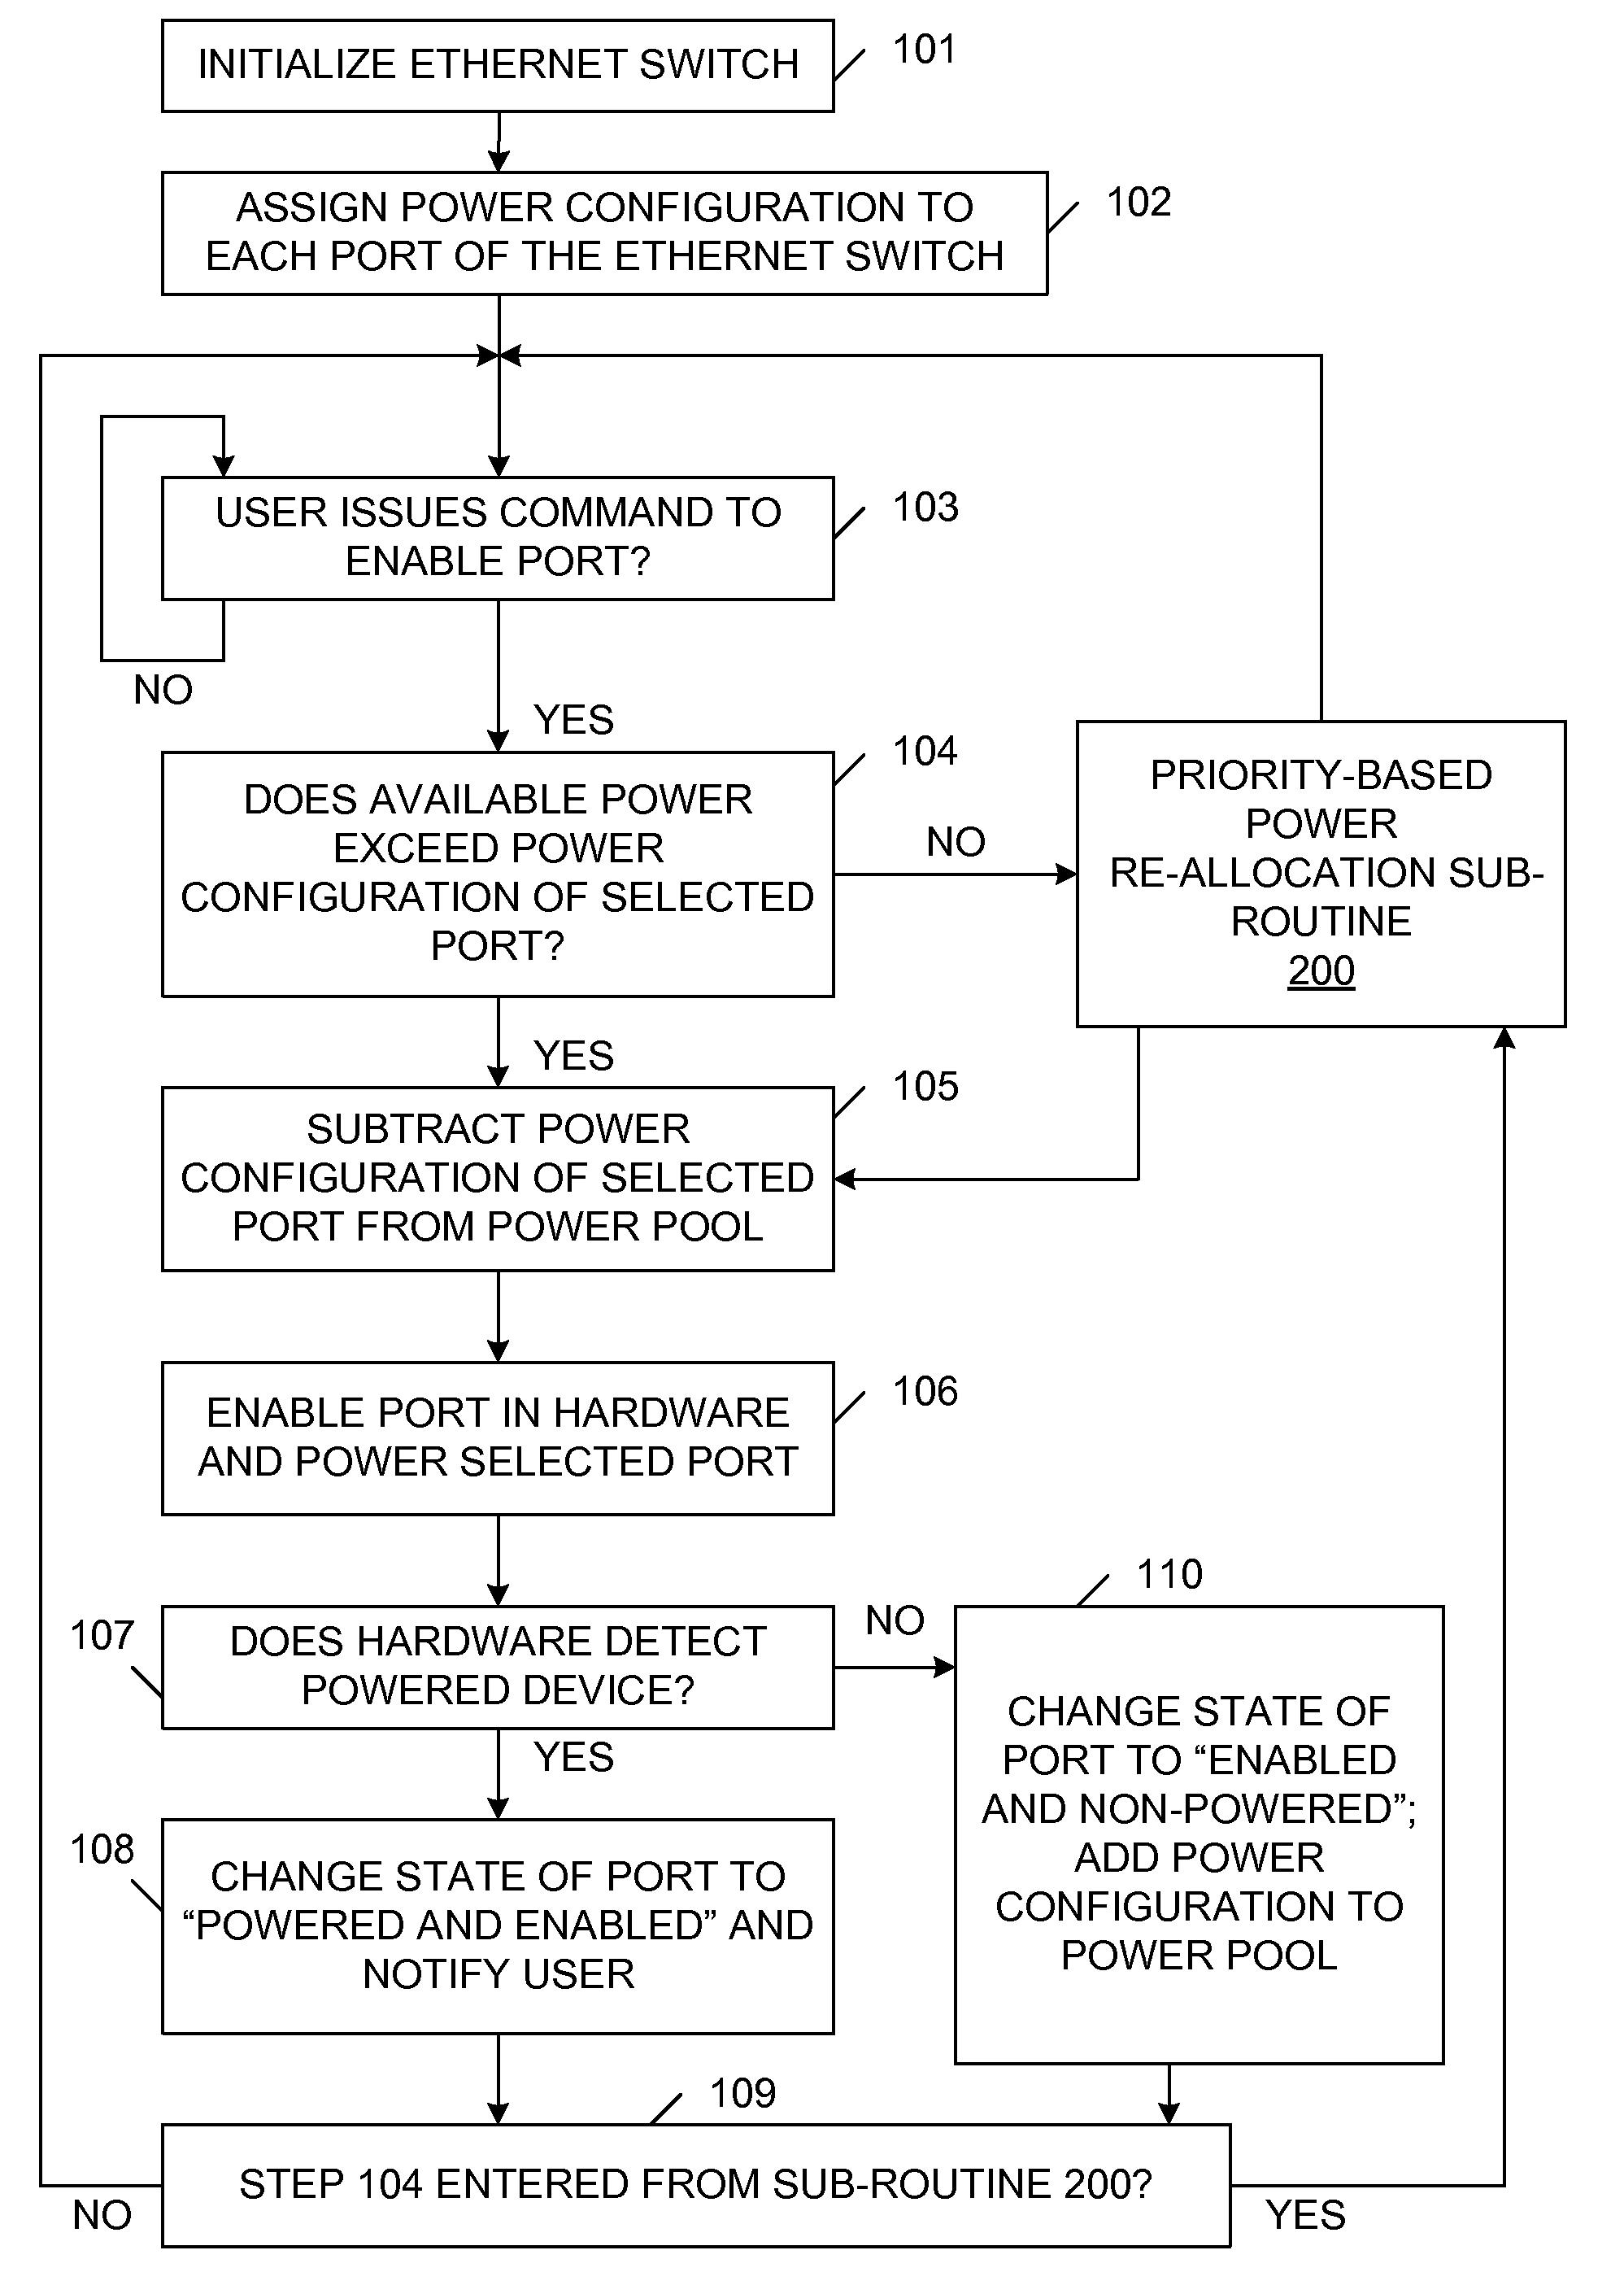 System software for managing power allocation to Ethernet ports in the absence of mutually exclusive detection and powering cycles in hardware